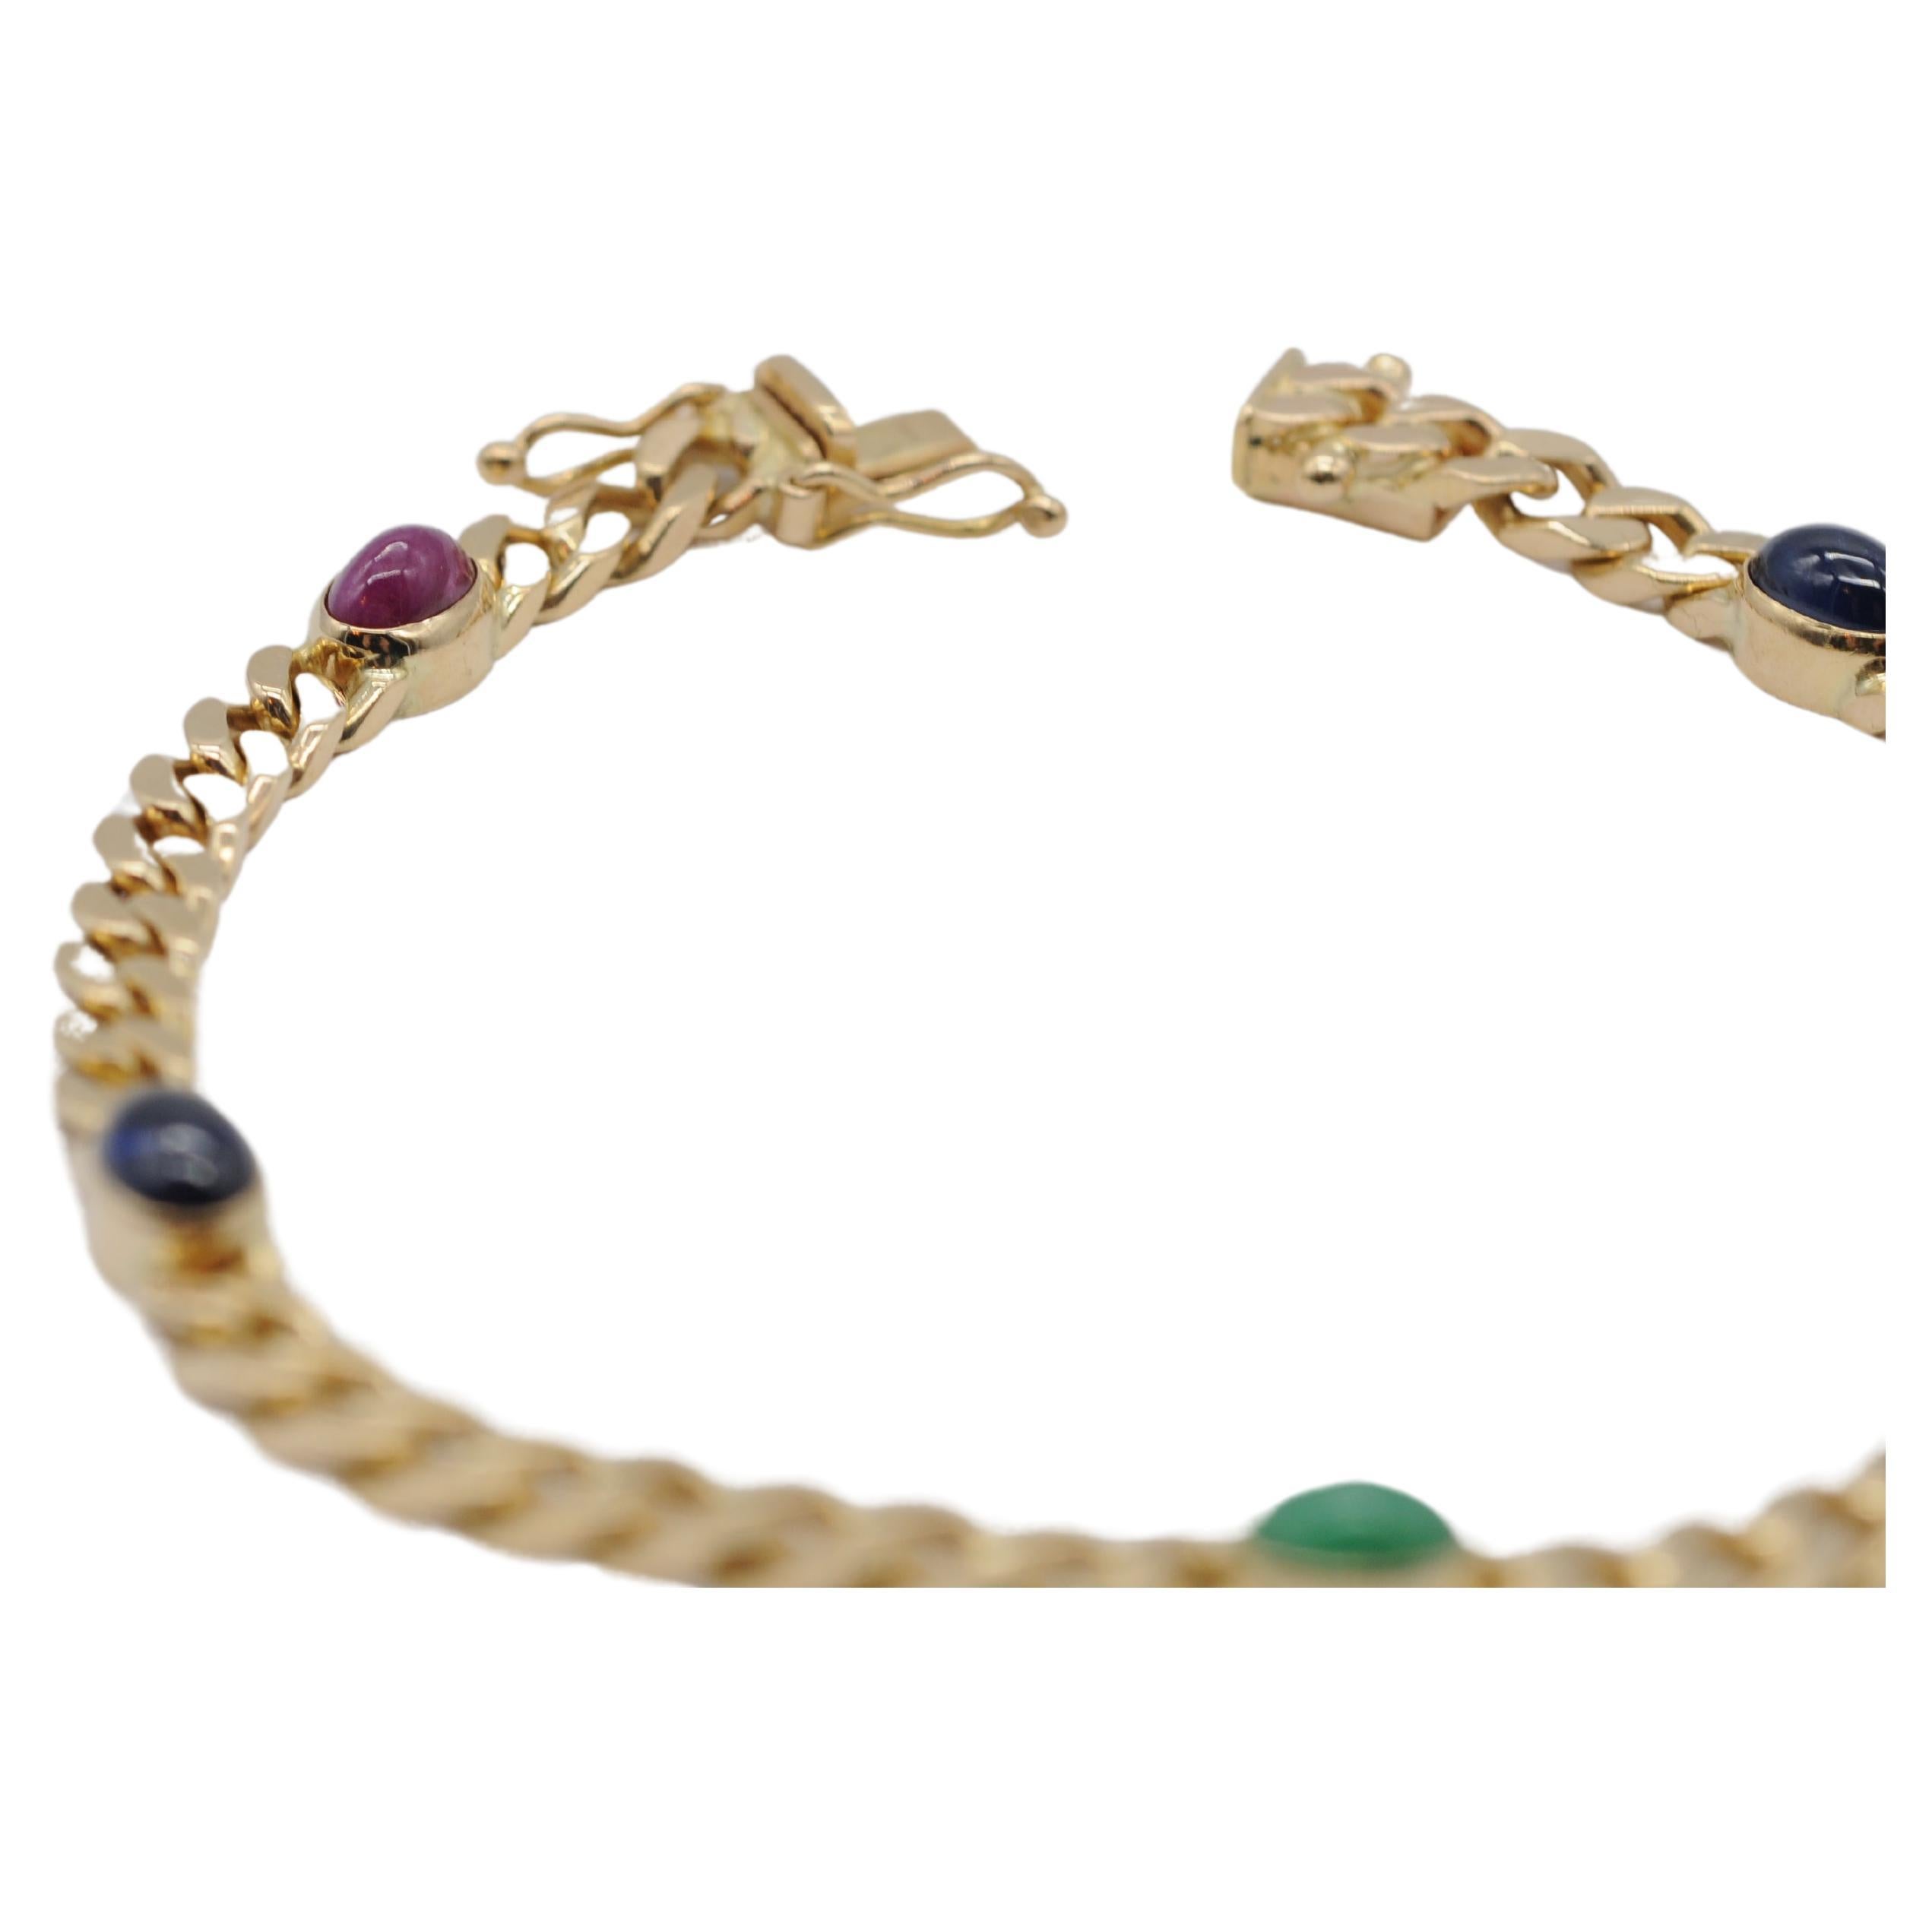 Noble 14k yellow gold bracelet with cabochon In Good Condition For Sale In Berlin, BE